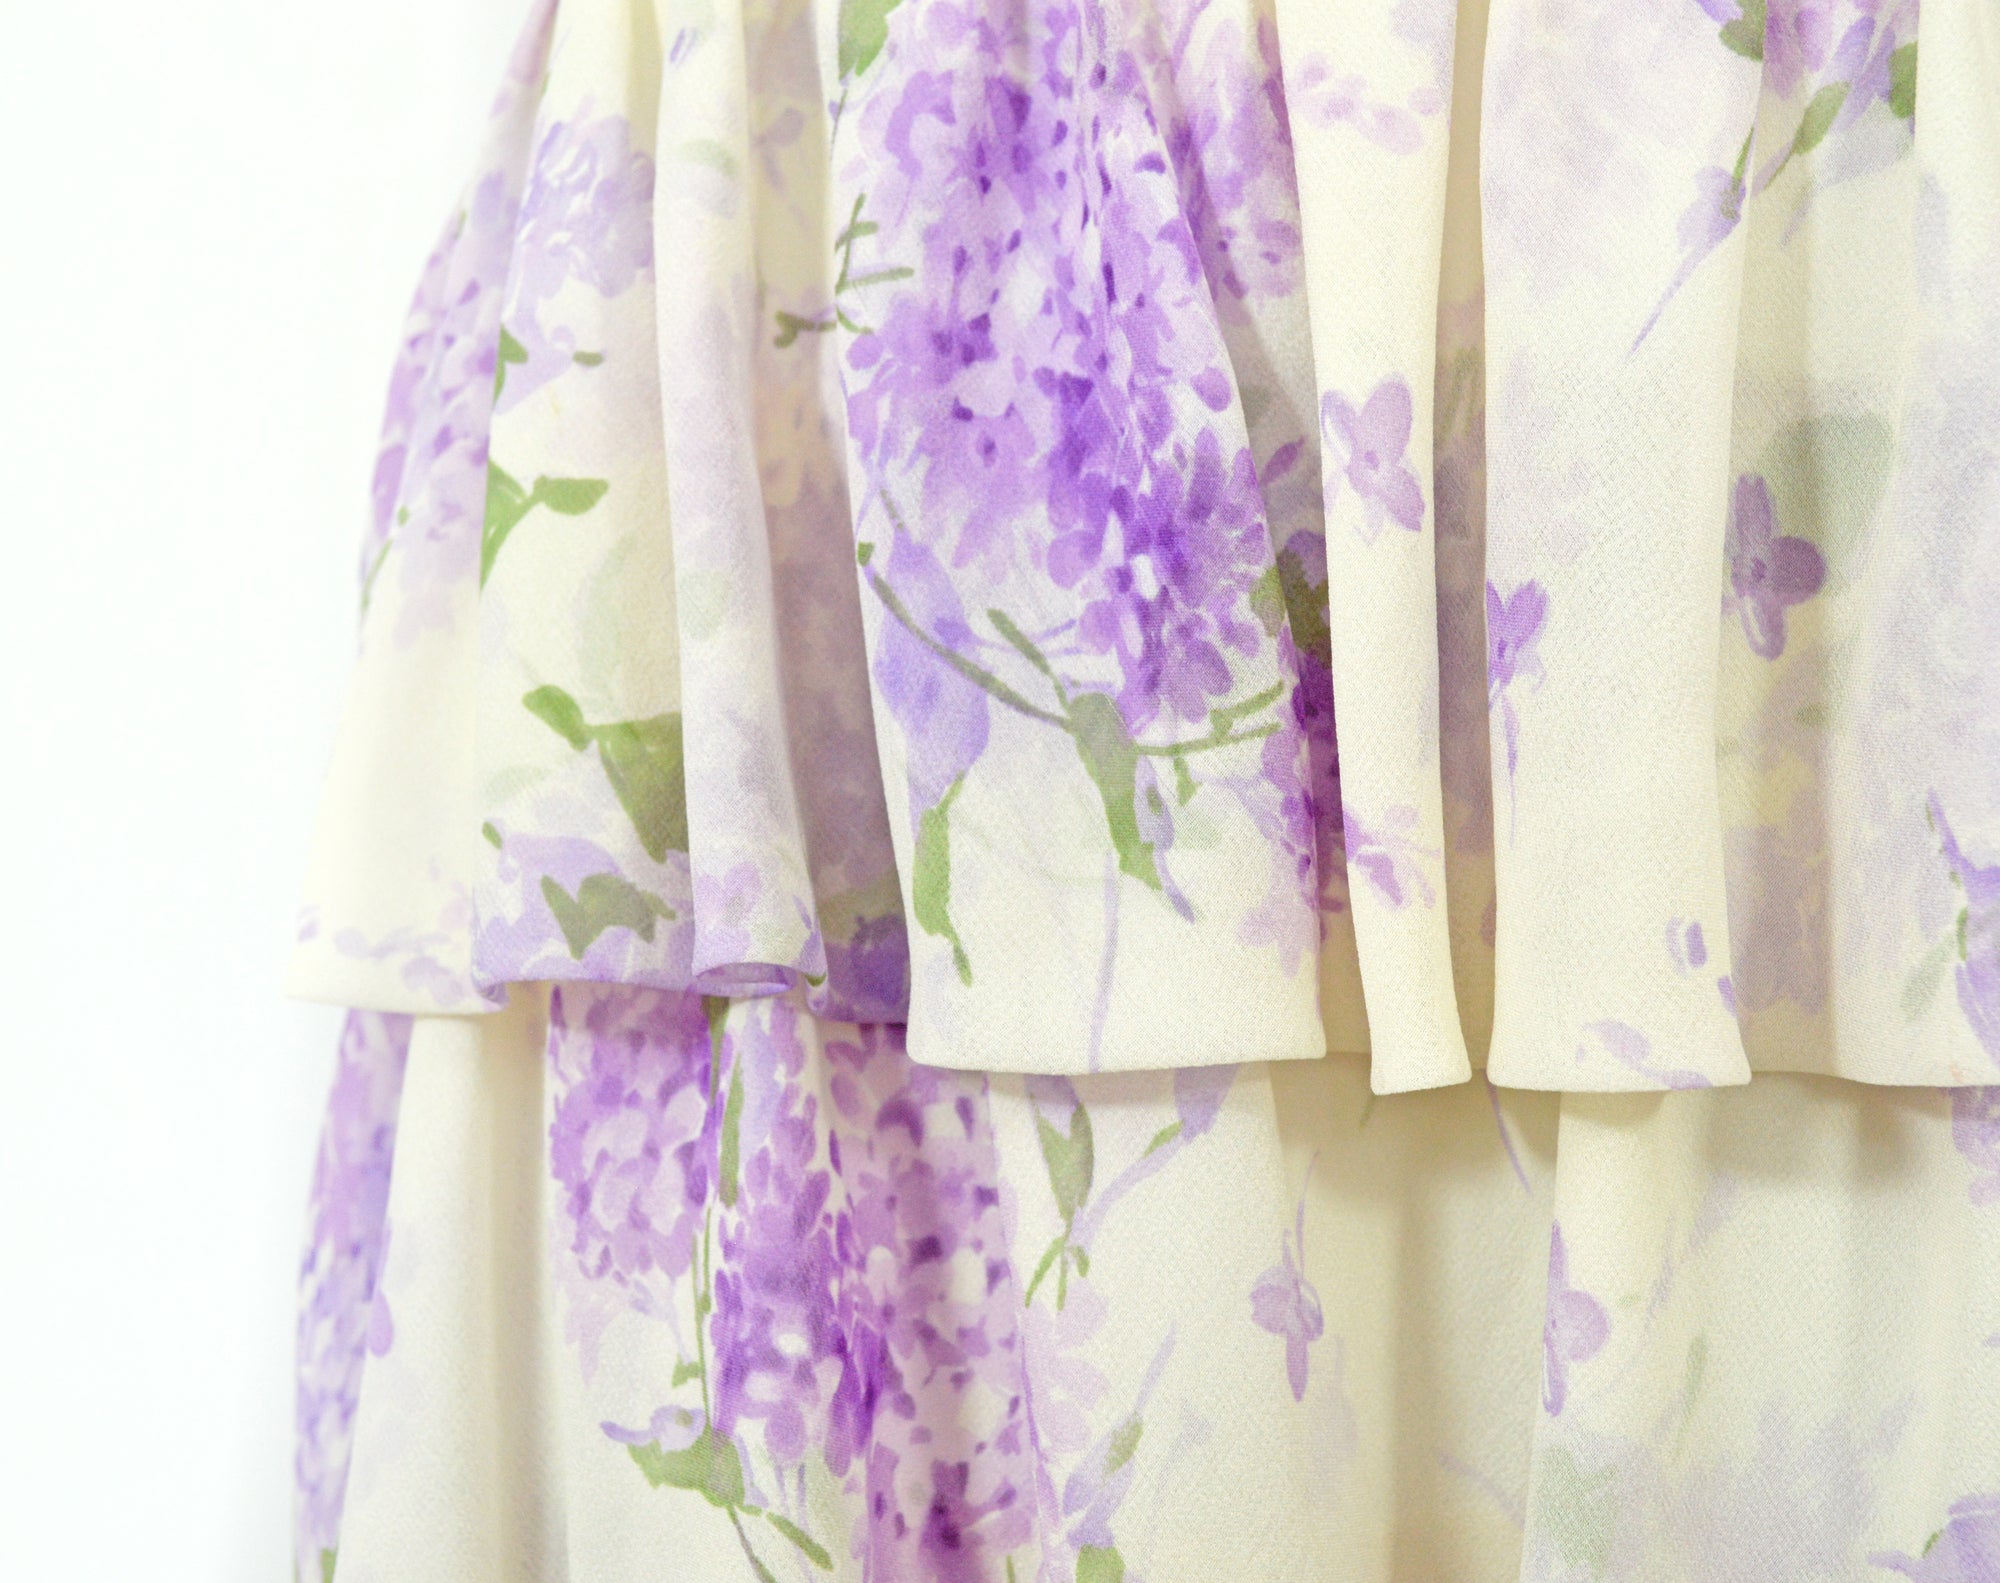 VALENTINO Cruise 2008 Lilac Floral Tiered Skirt